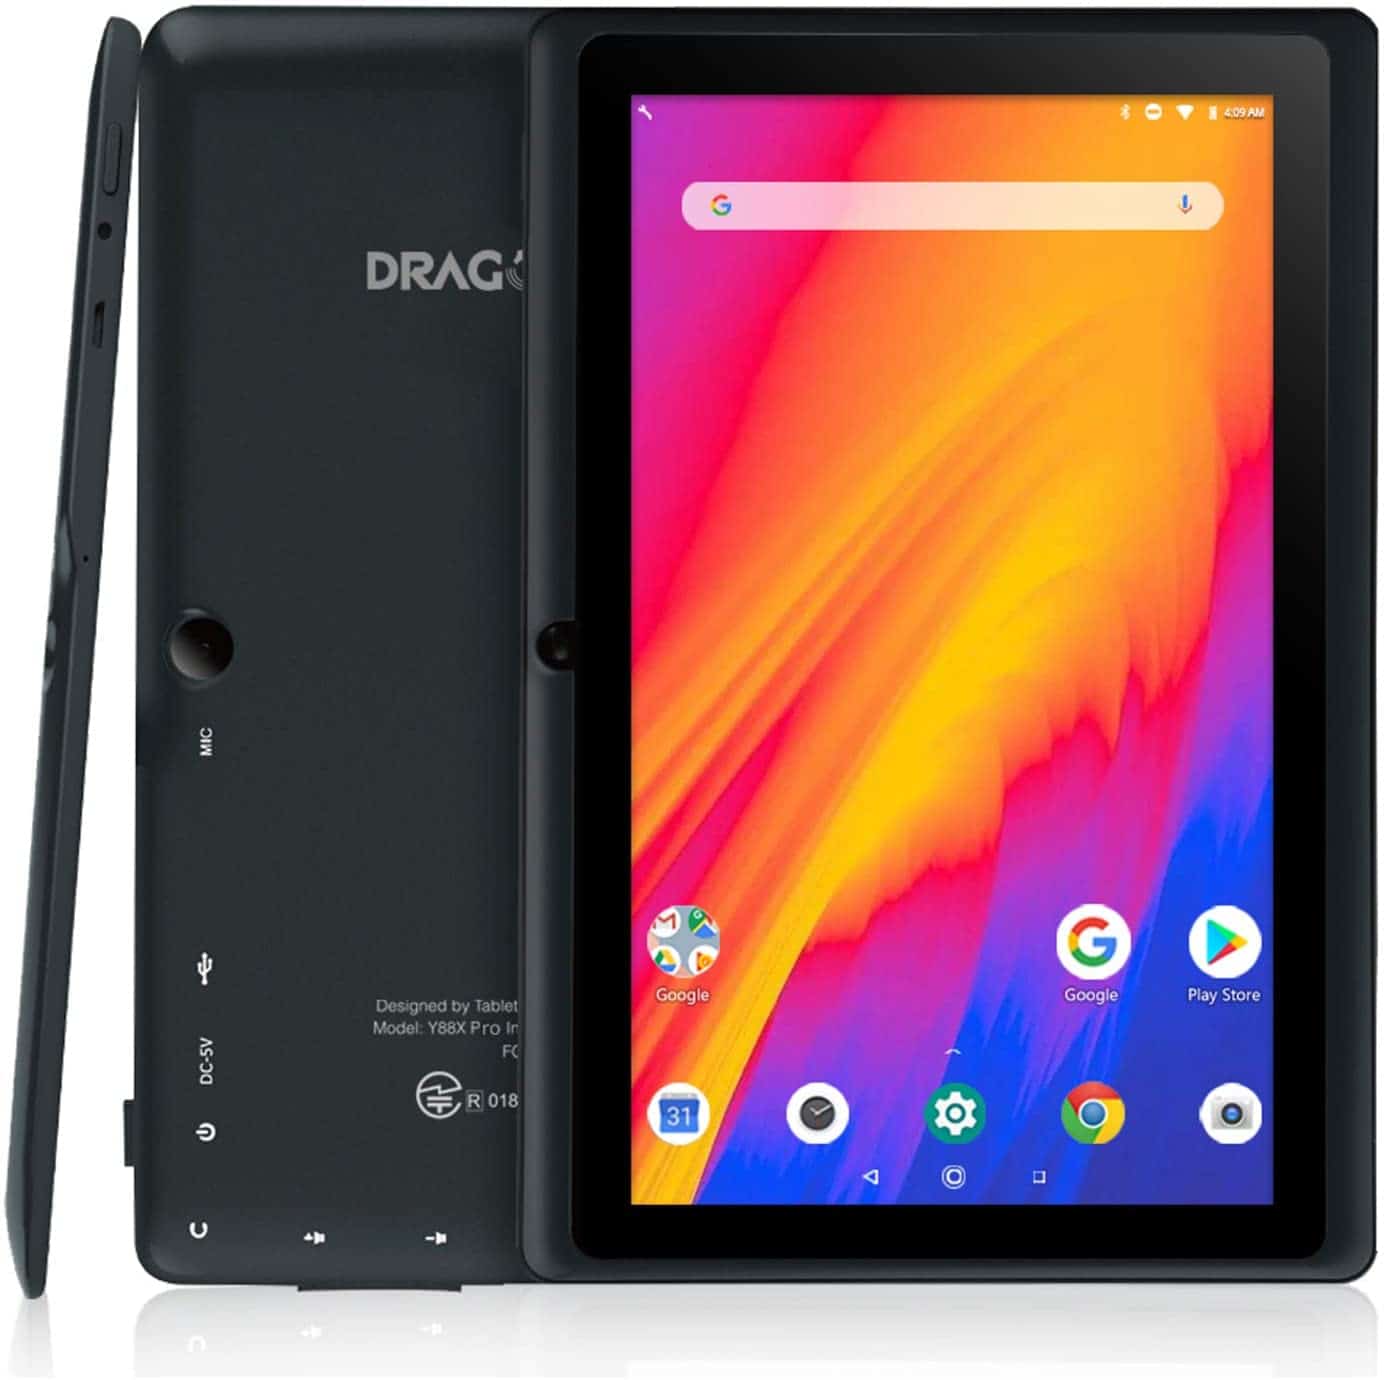 Dragon Touch 7 inch Tablet, Android 9.0 Pie